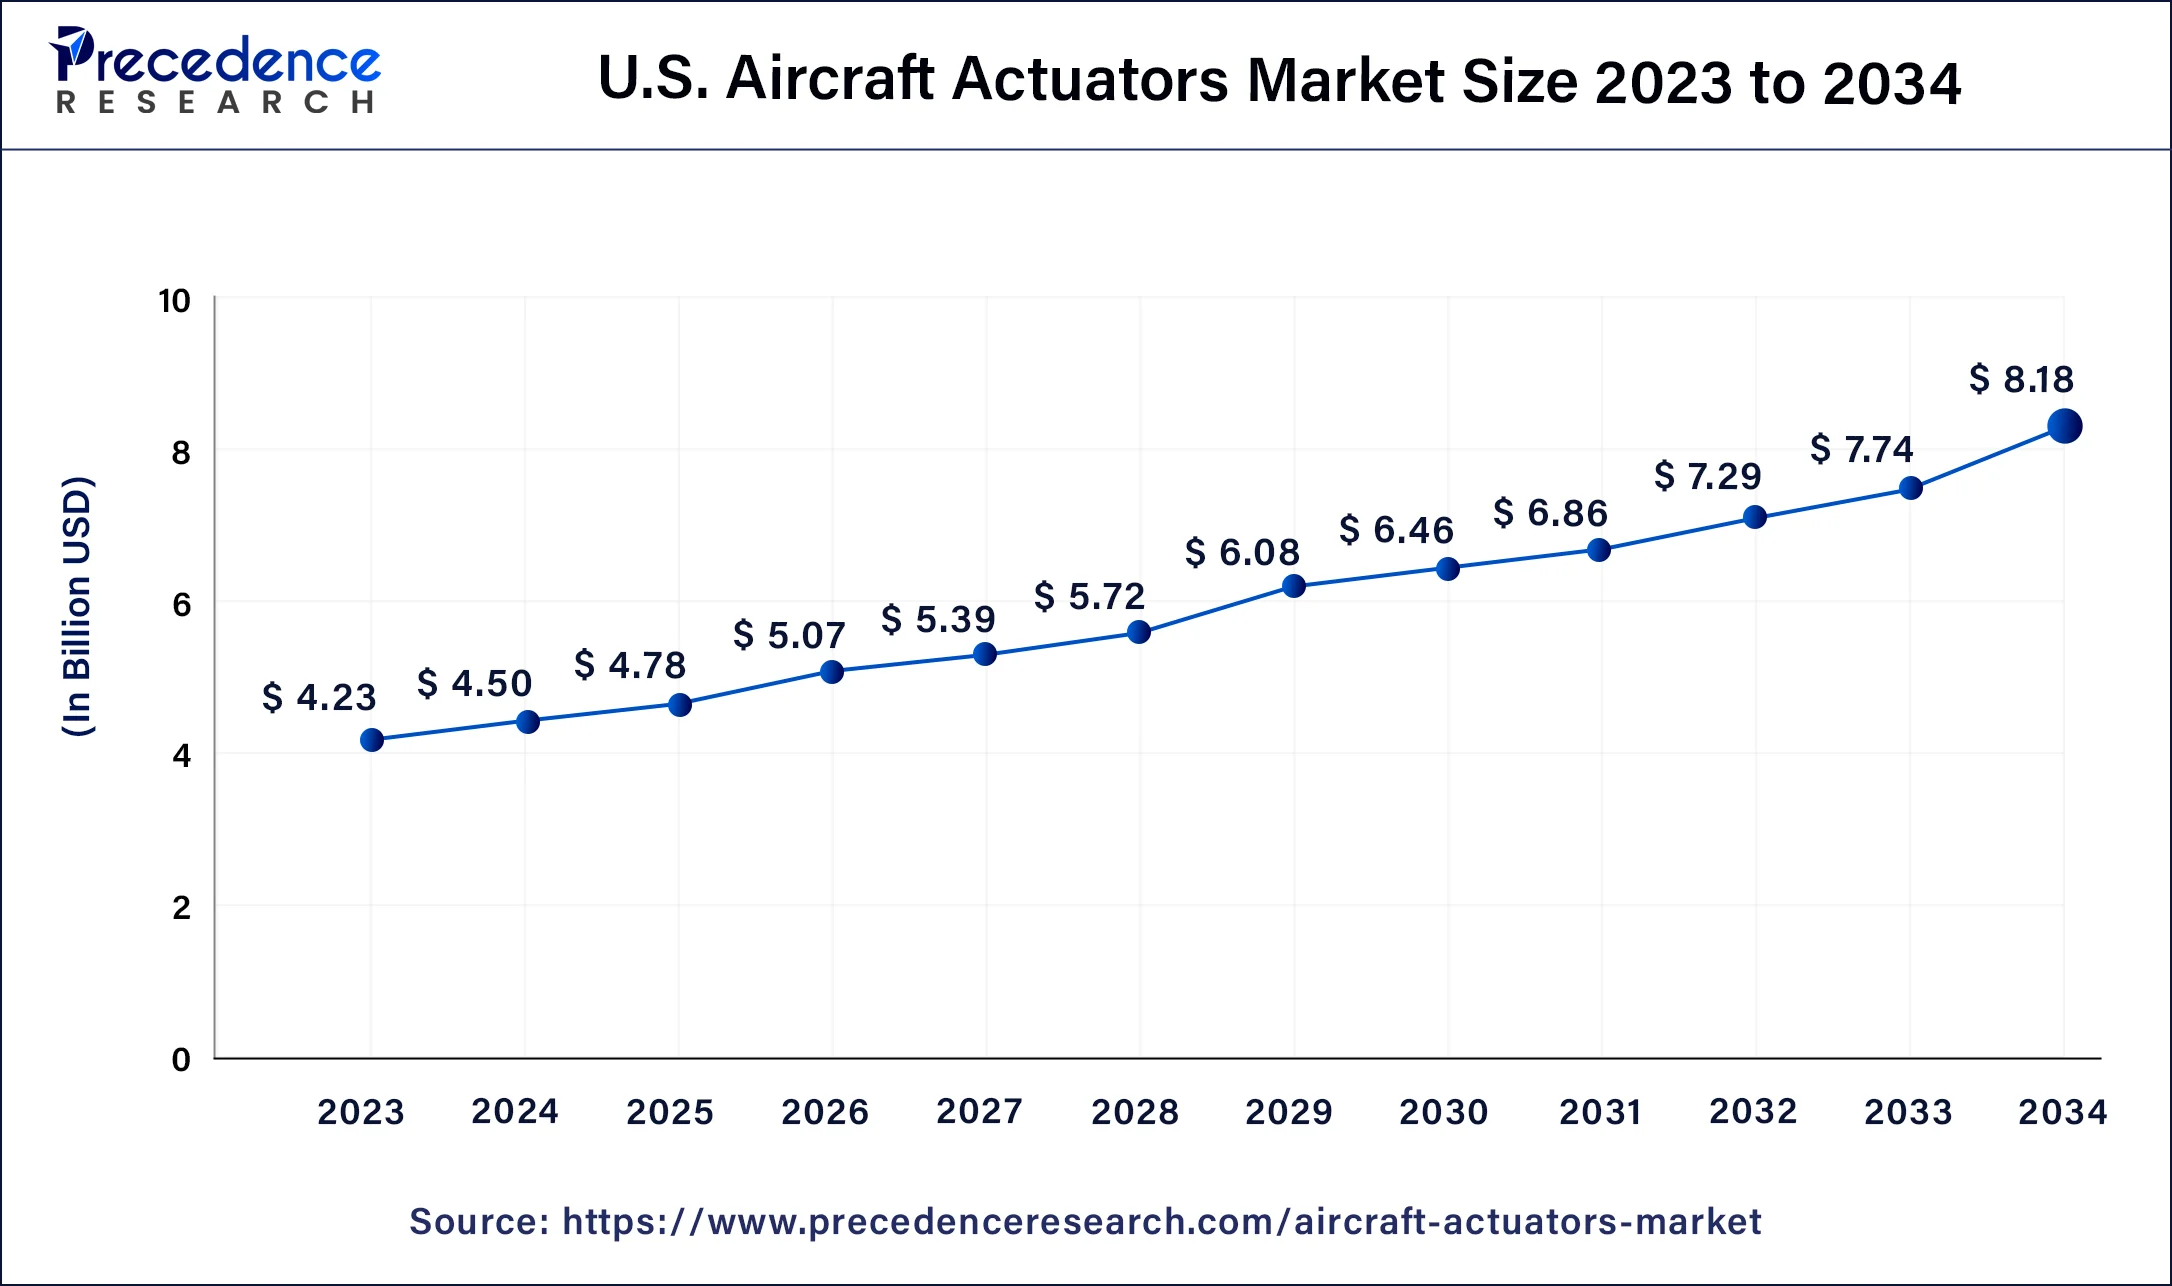 U.S. Aerial Imaging Market Size 2024 to 2034